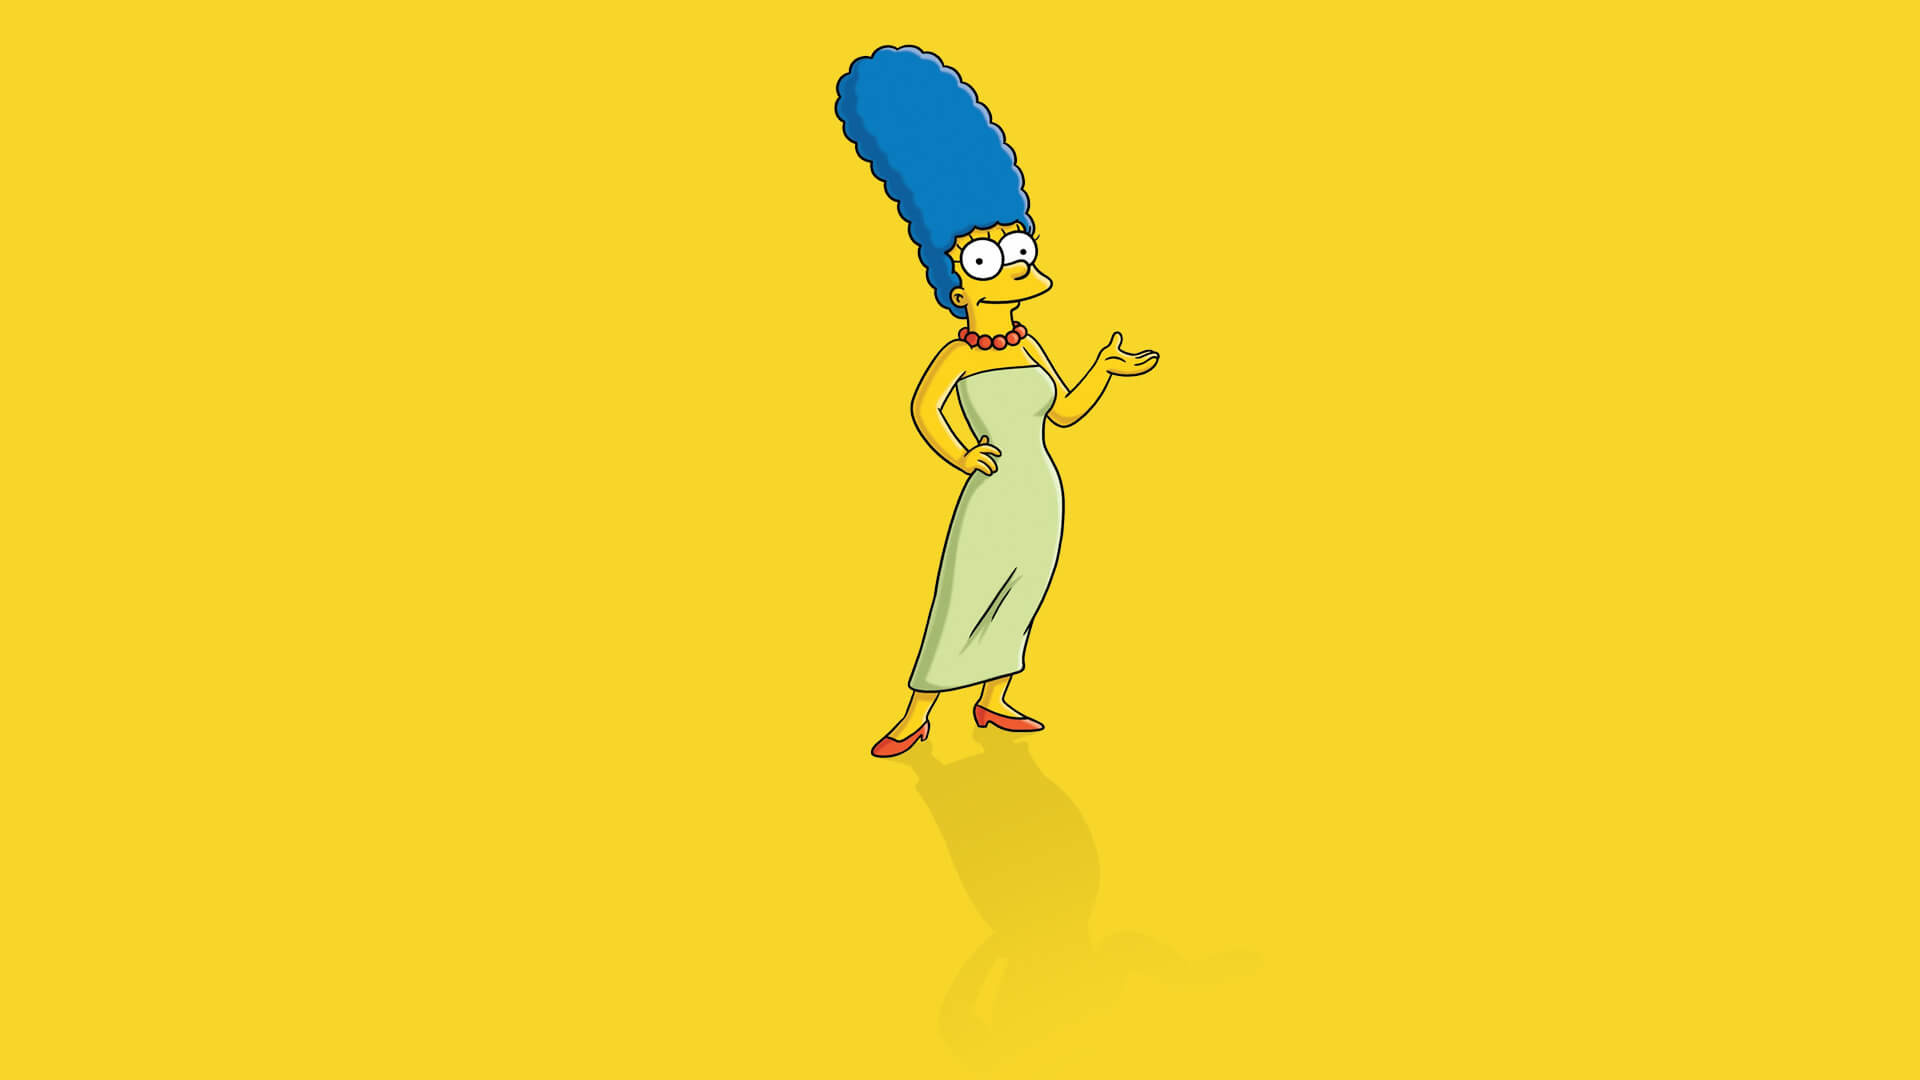 1920x1080 Simpsons Wallpapers For iPad